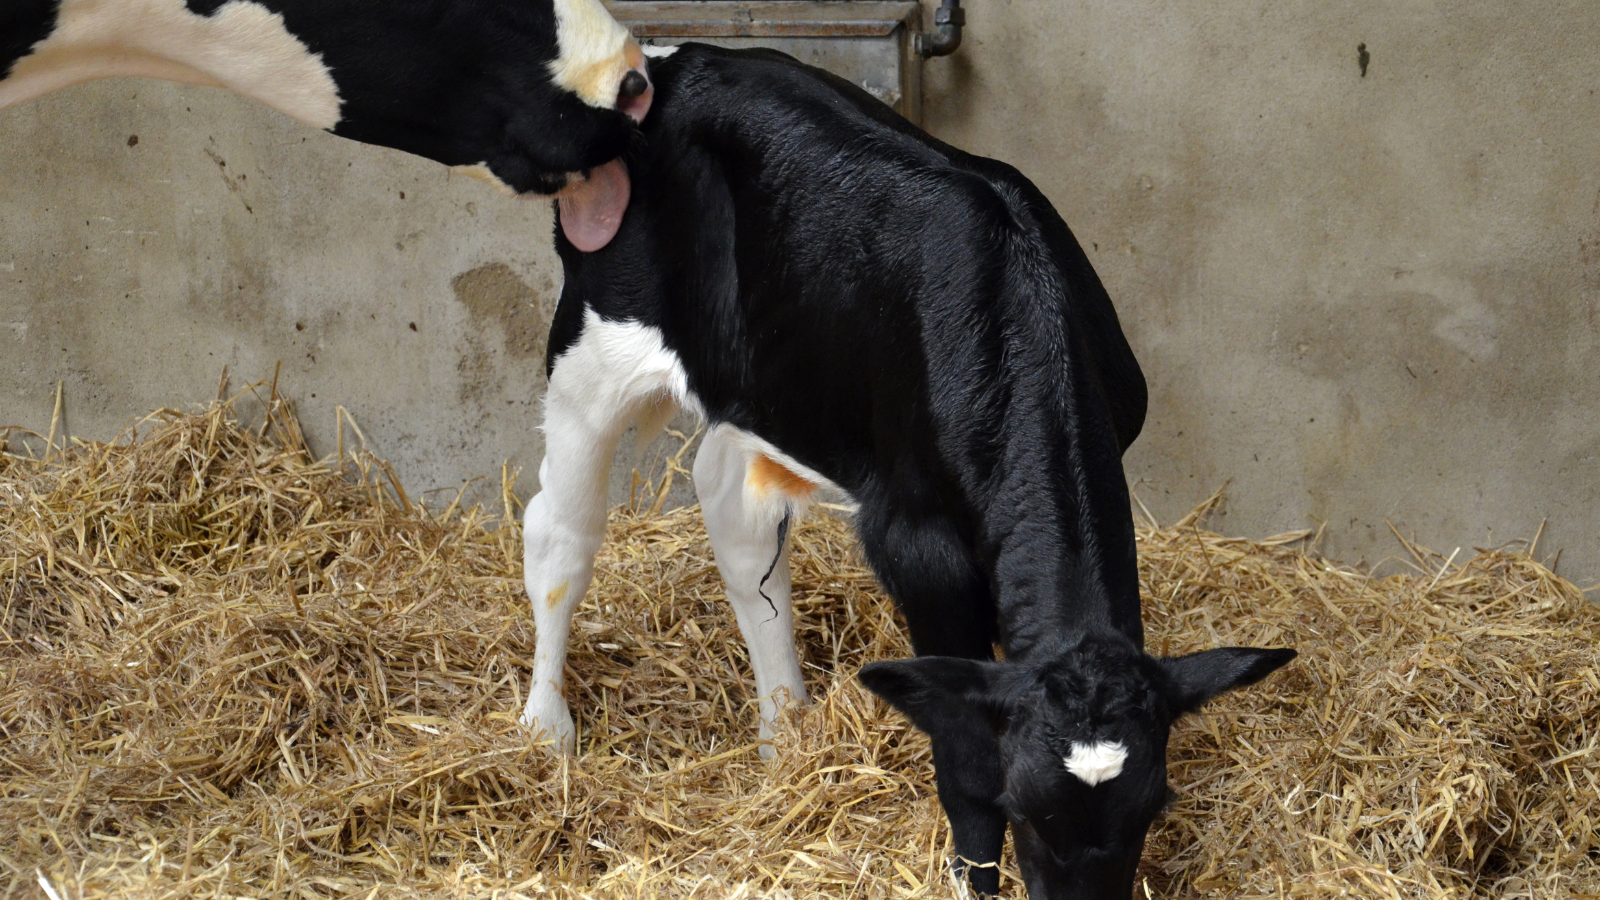 Cow licking calf in shed